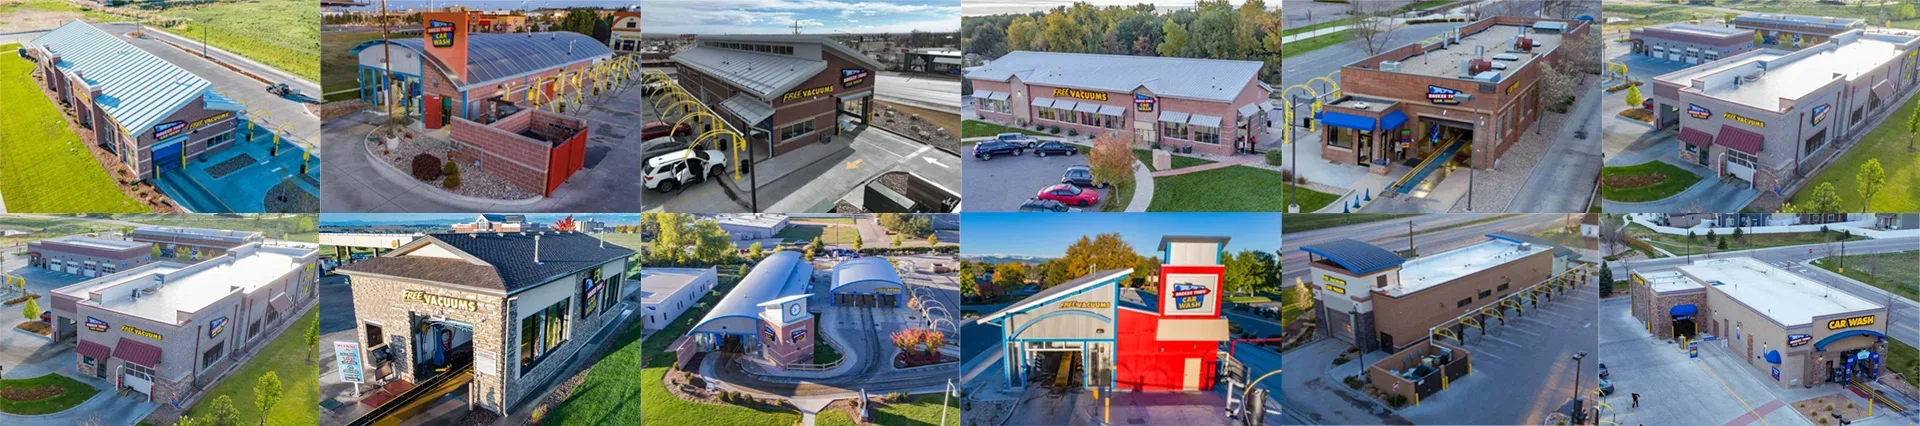 A series of aerial photographs showcasing various commercial properties including shopping centers, standalone shops, and complexes with parking lots, capturing the architecture and layout from different angles.